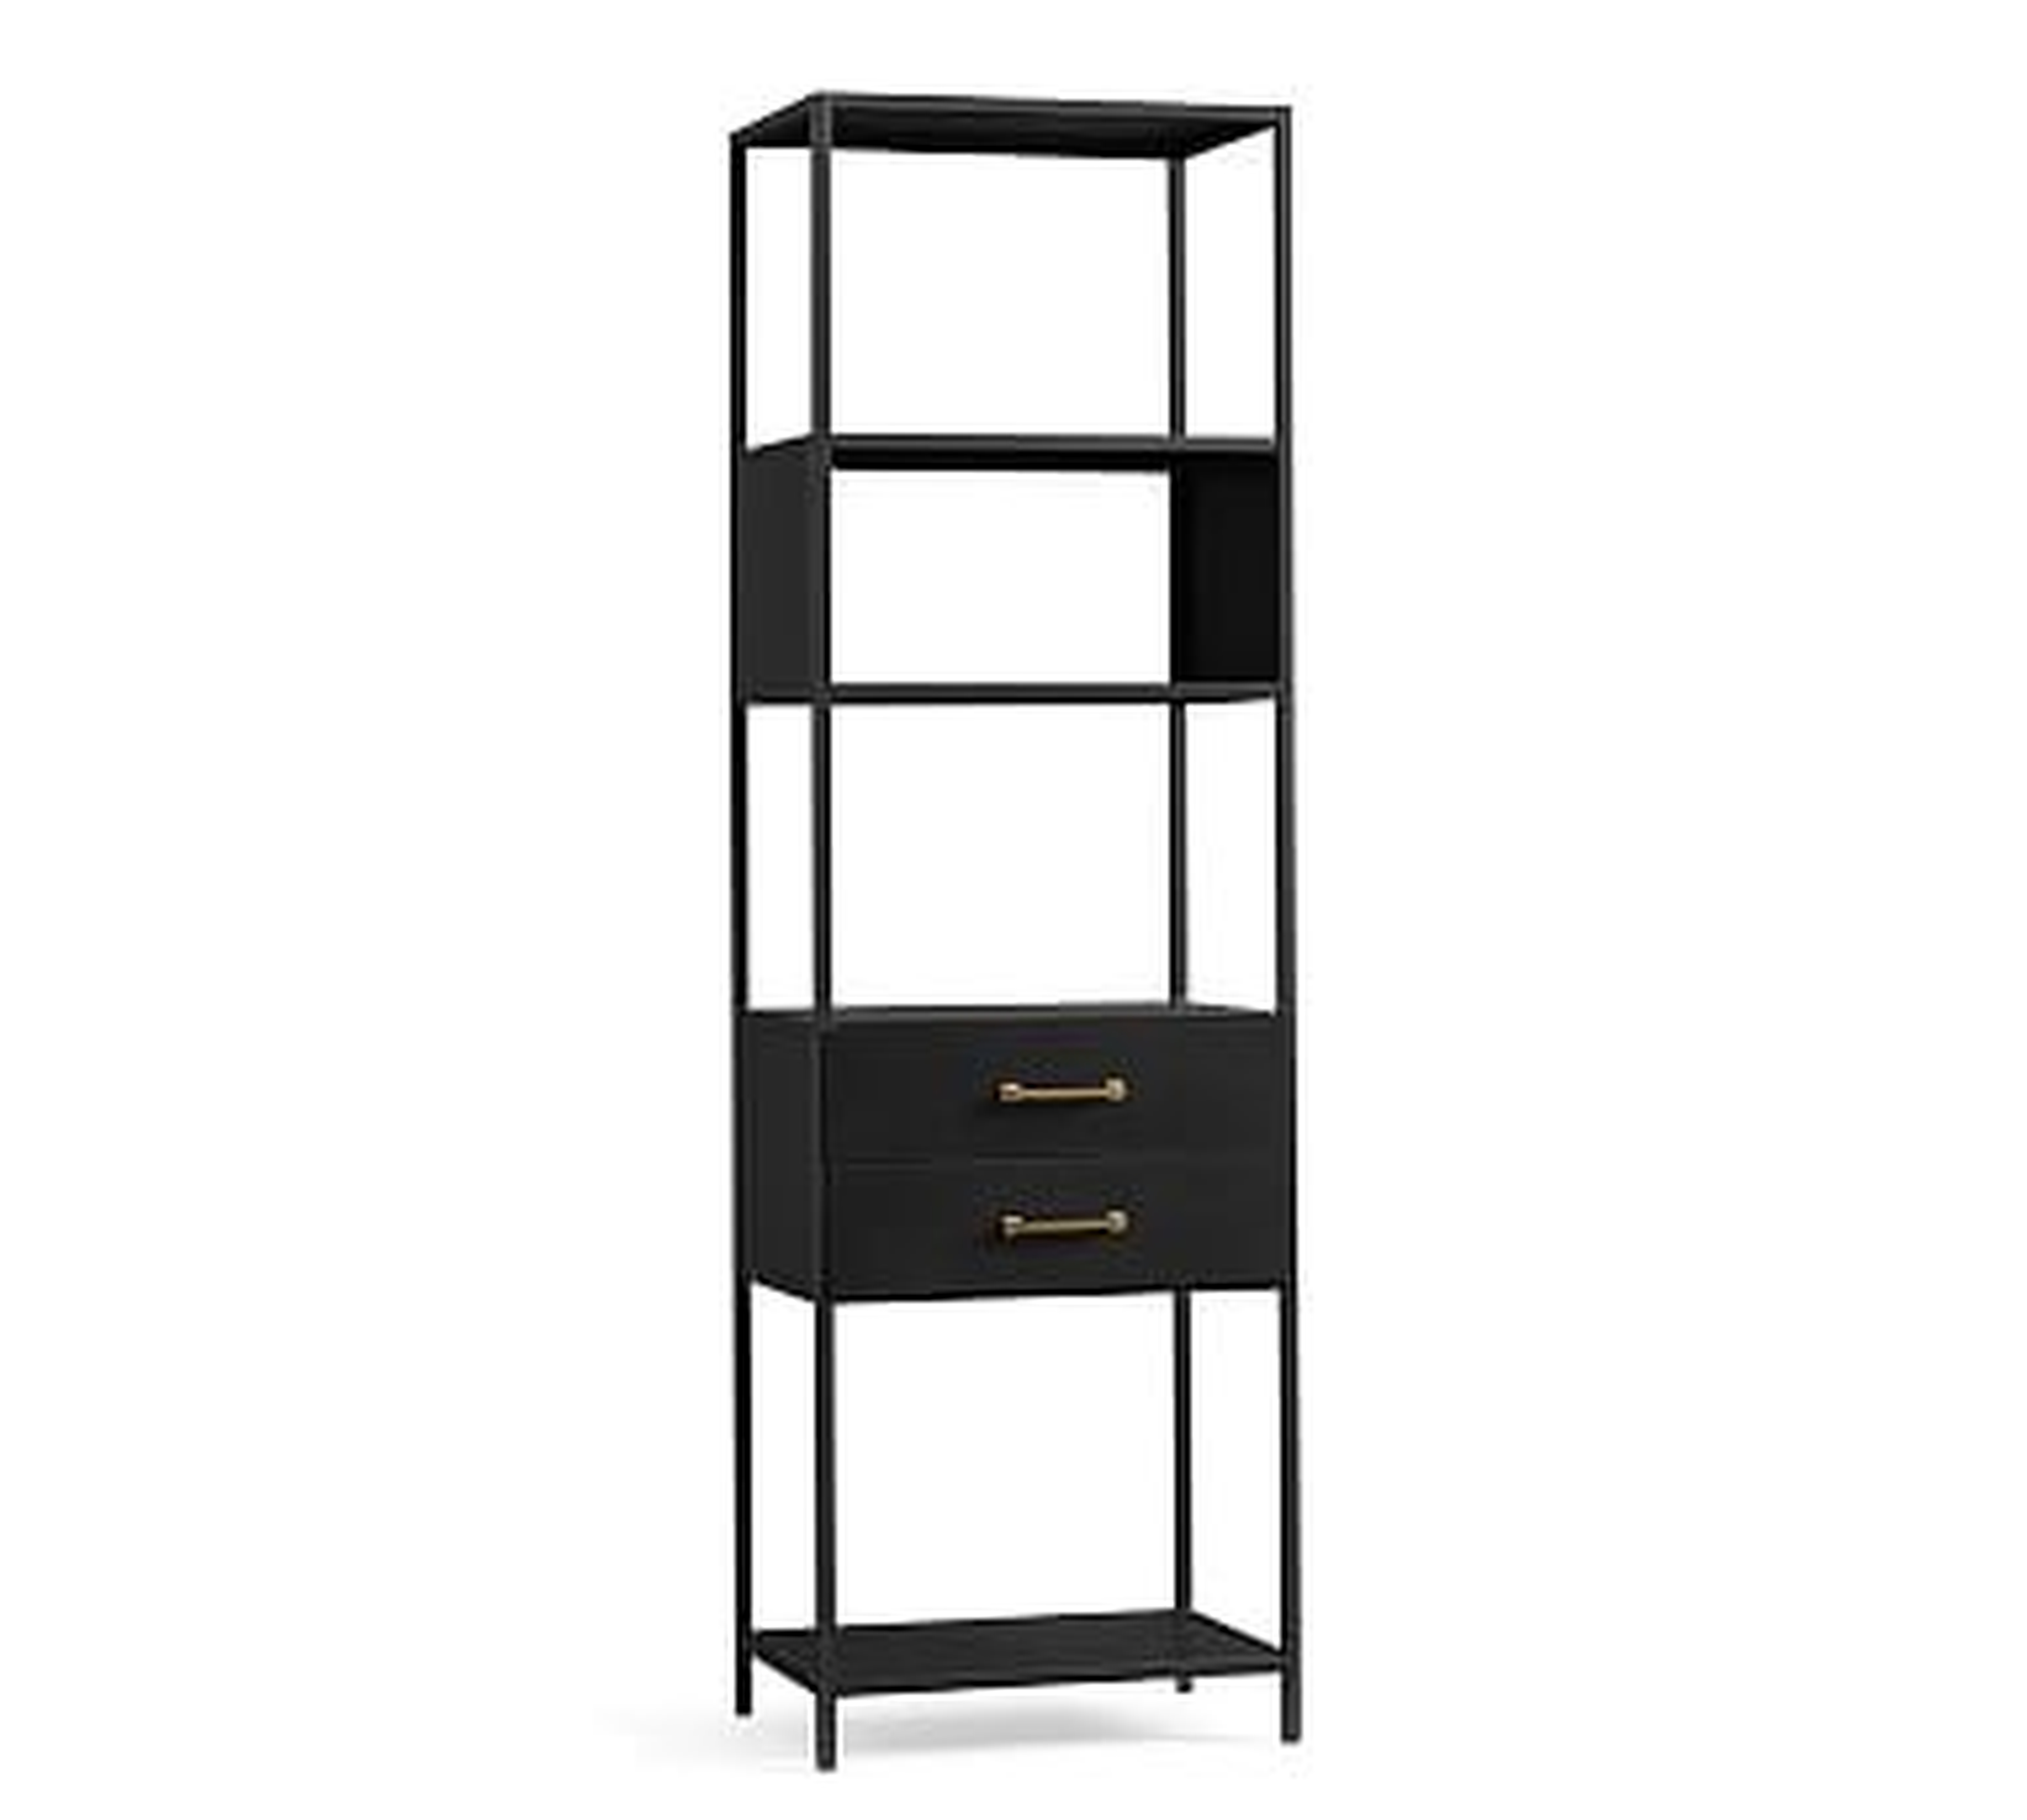 Wilson Bookcase with Drawers, Black - Pottery Barn